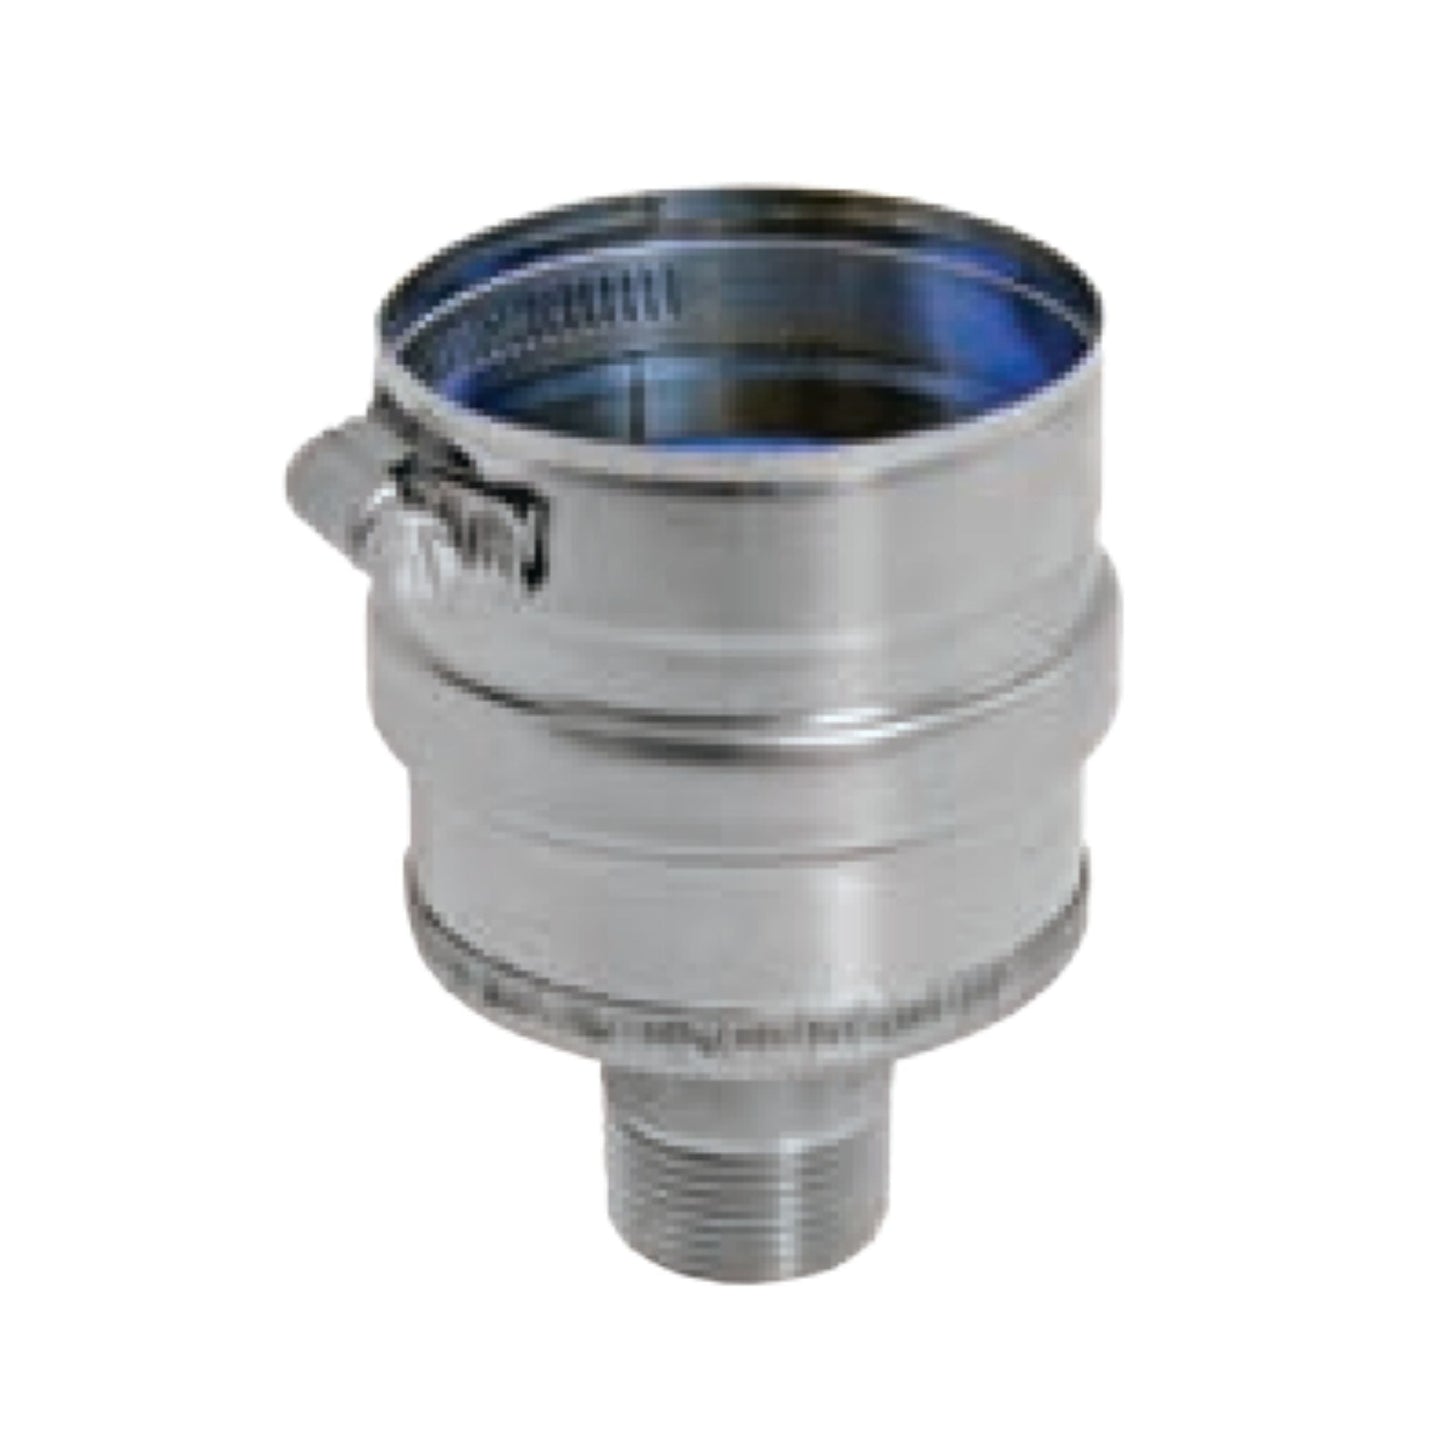 DuraVent FasNSeal 7" 29-4C Stainless Steel IPS Drain Fitting